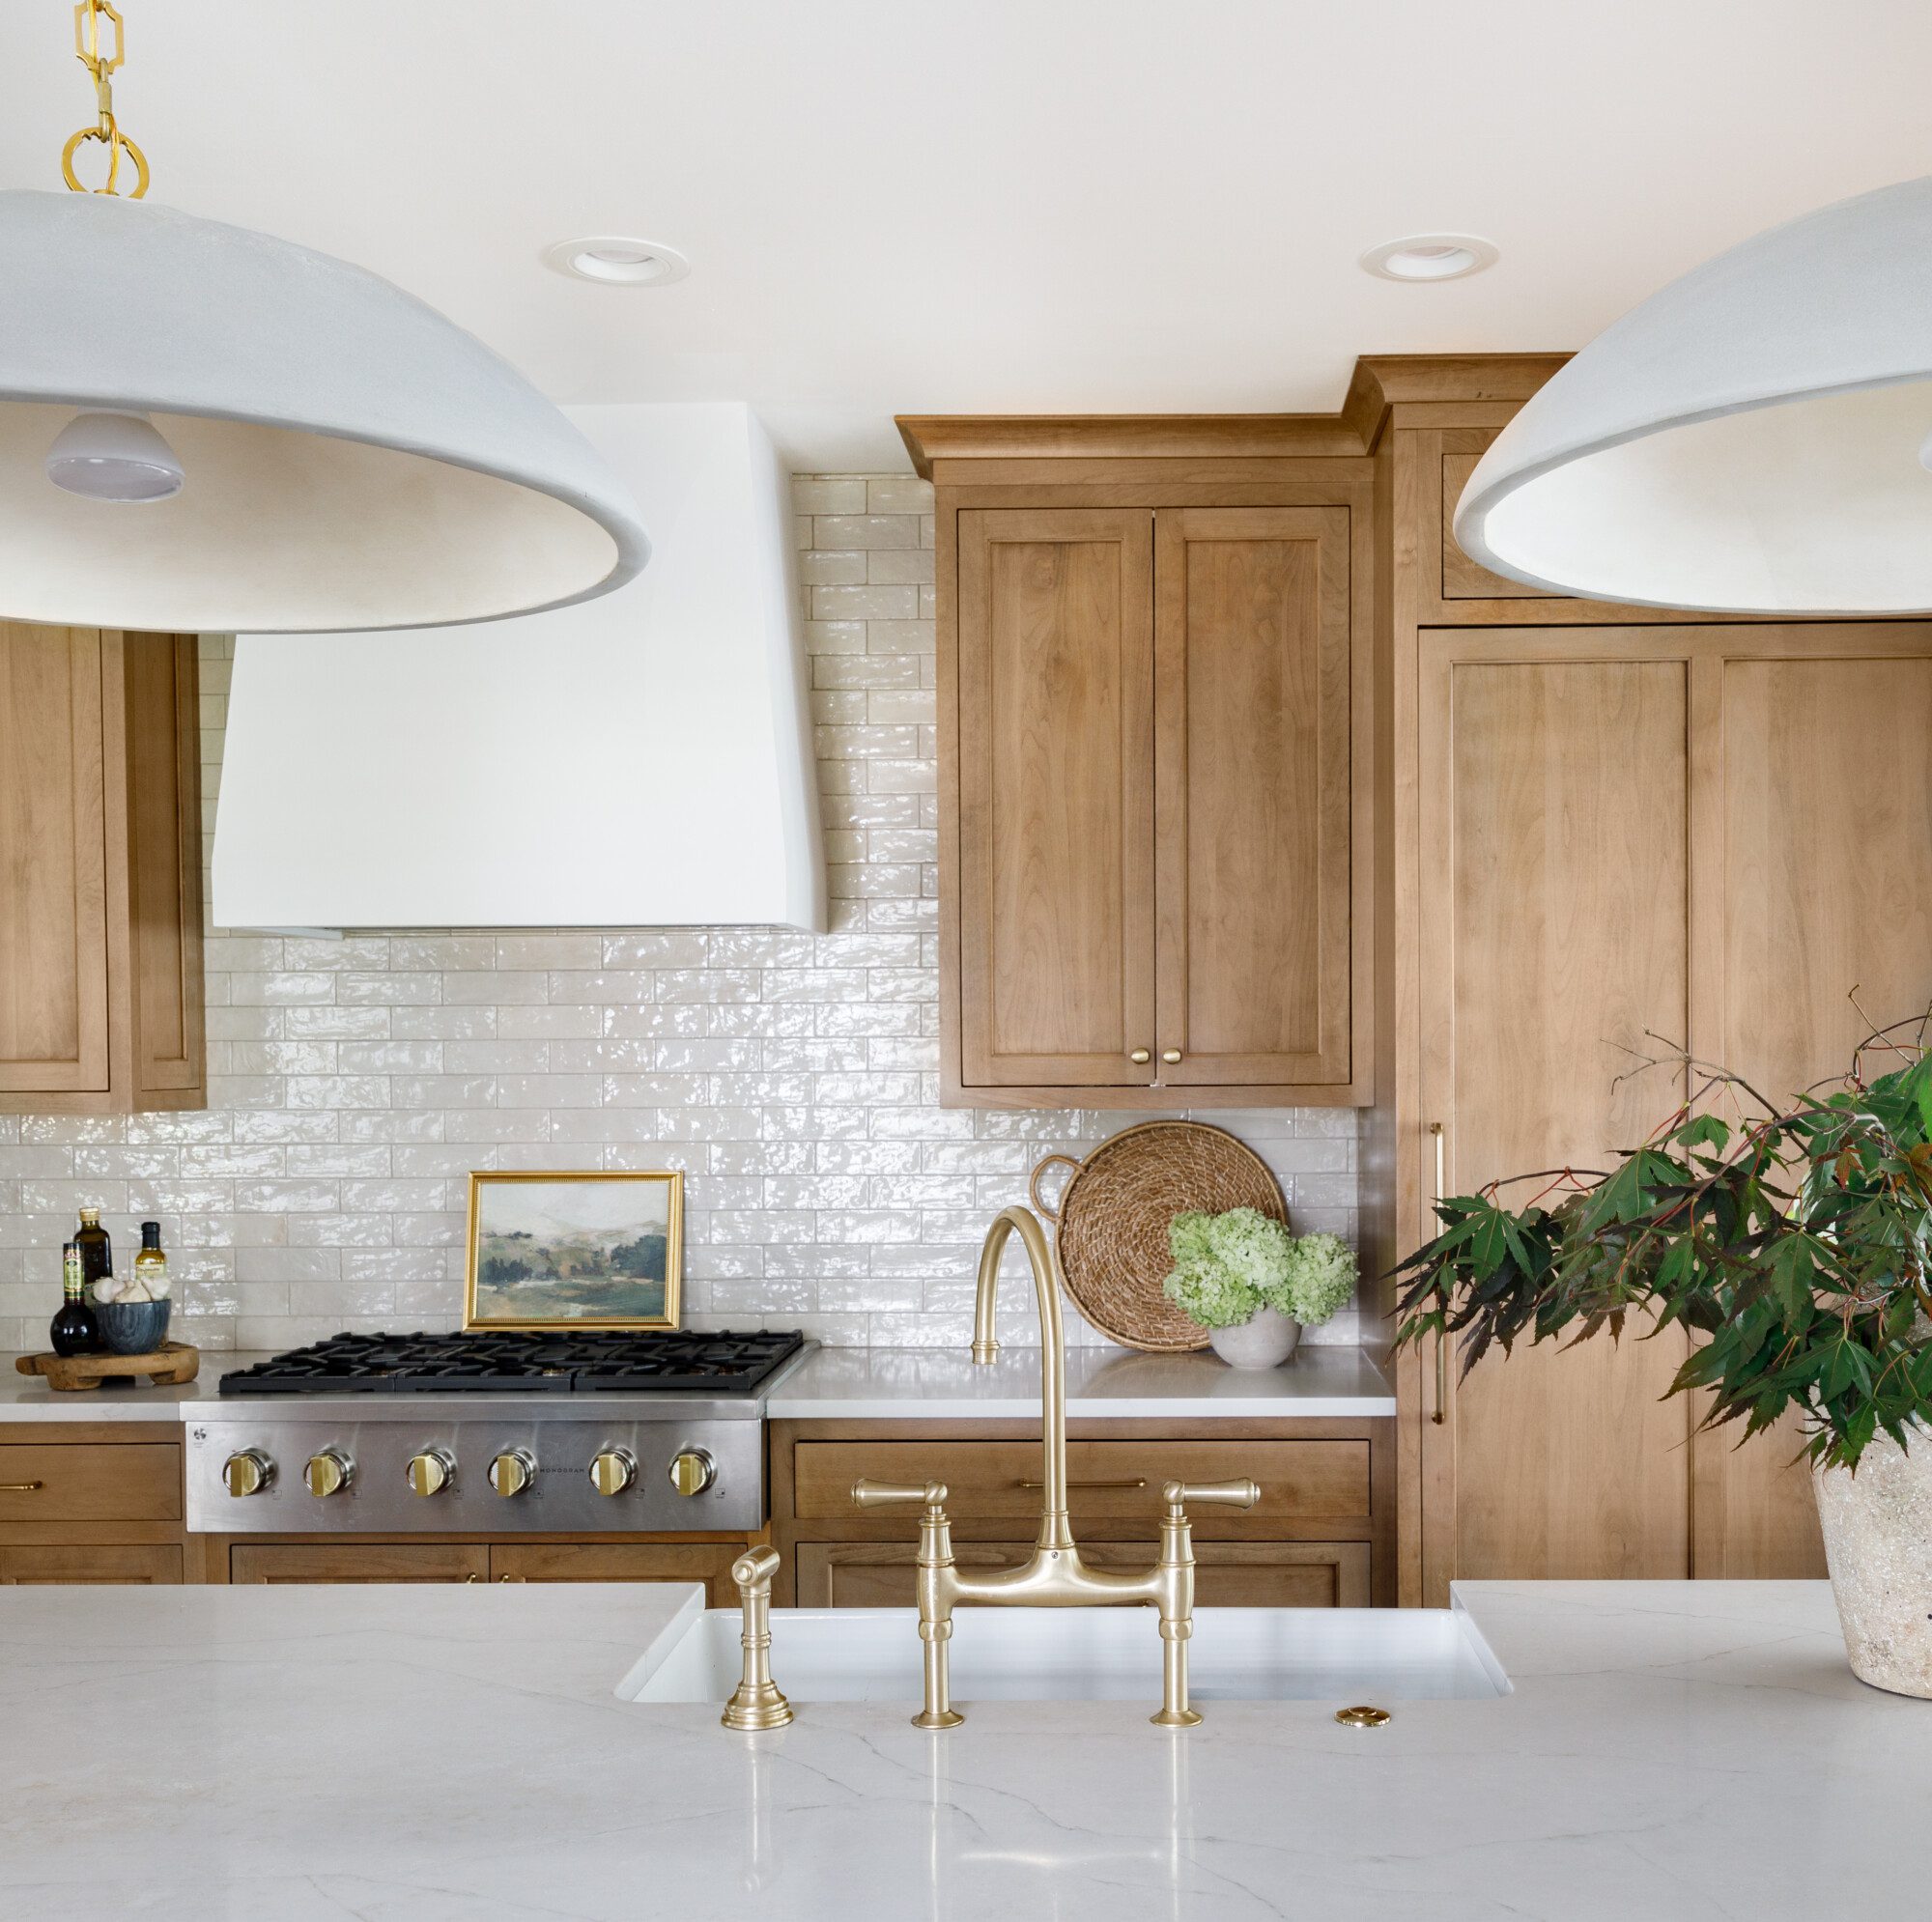 Beautiful kitchen with light stained wood and white and gold accents